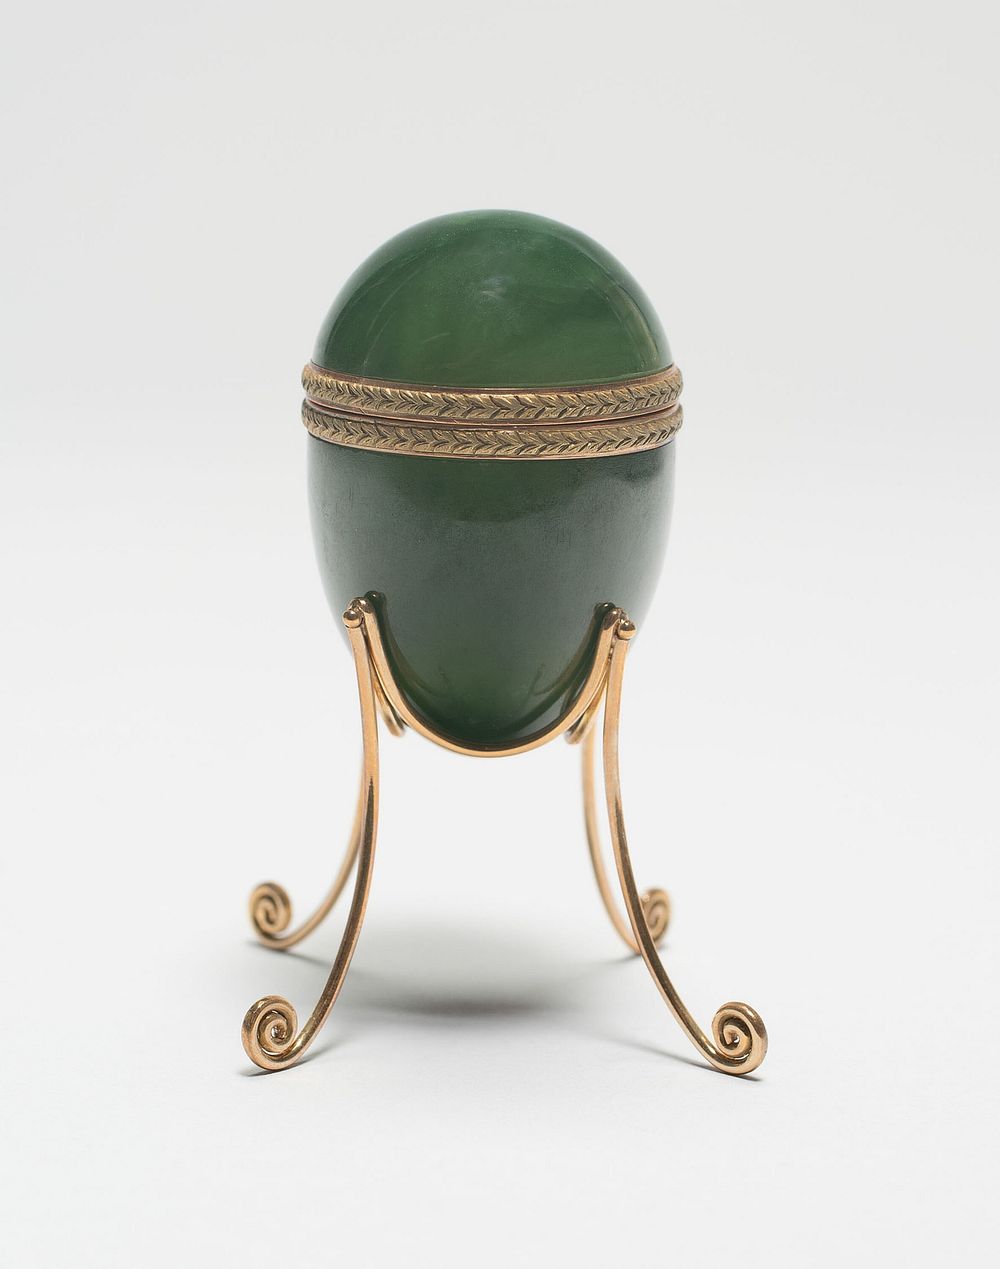 Miniature Box with Lid in the form of an Egg and Stand by Henrik Wigström